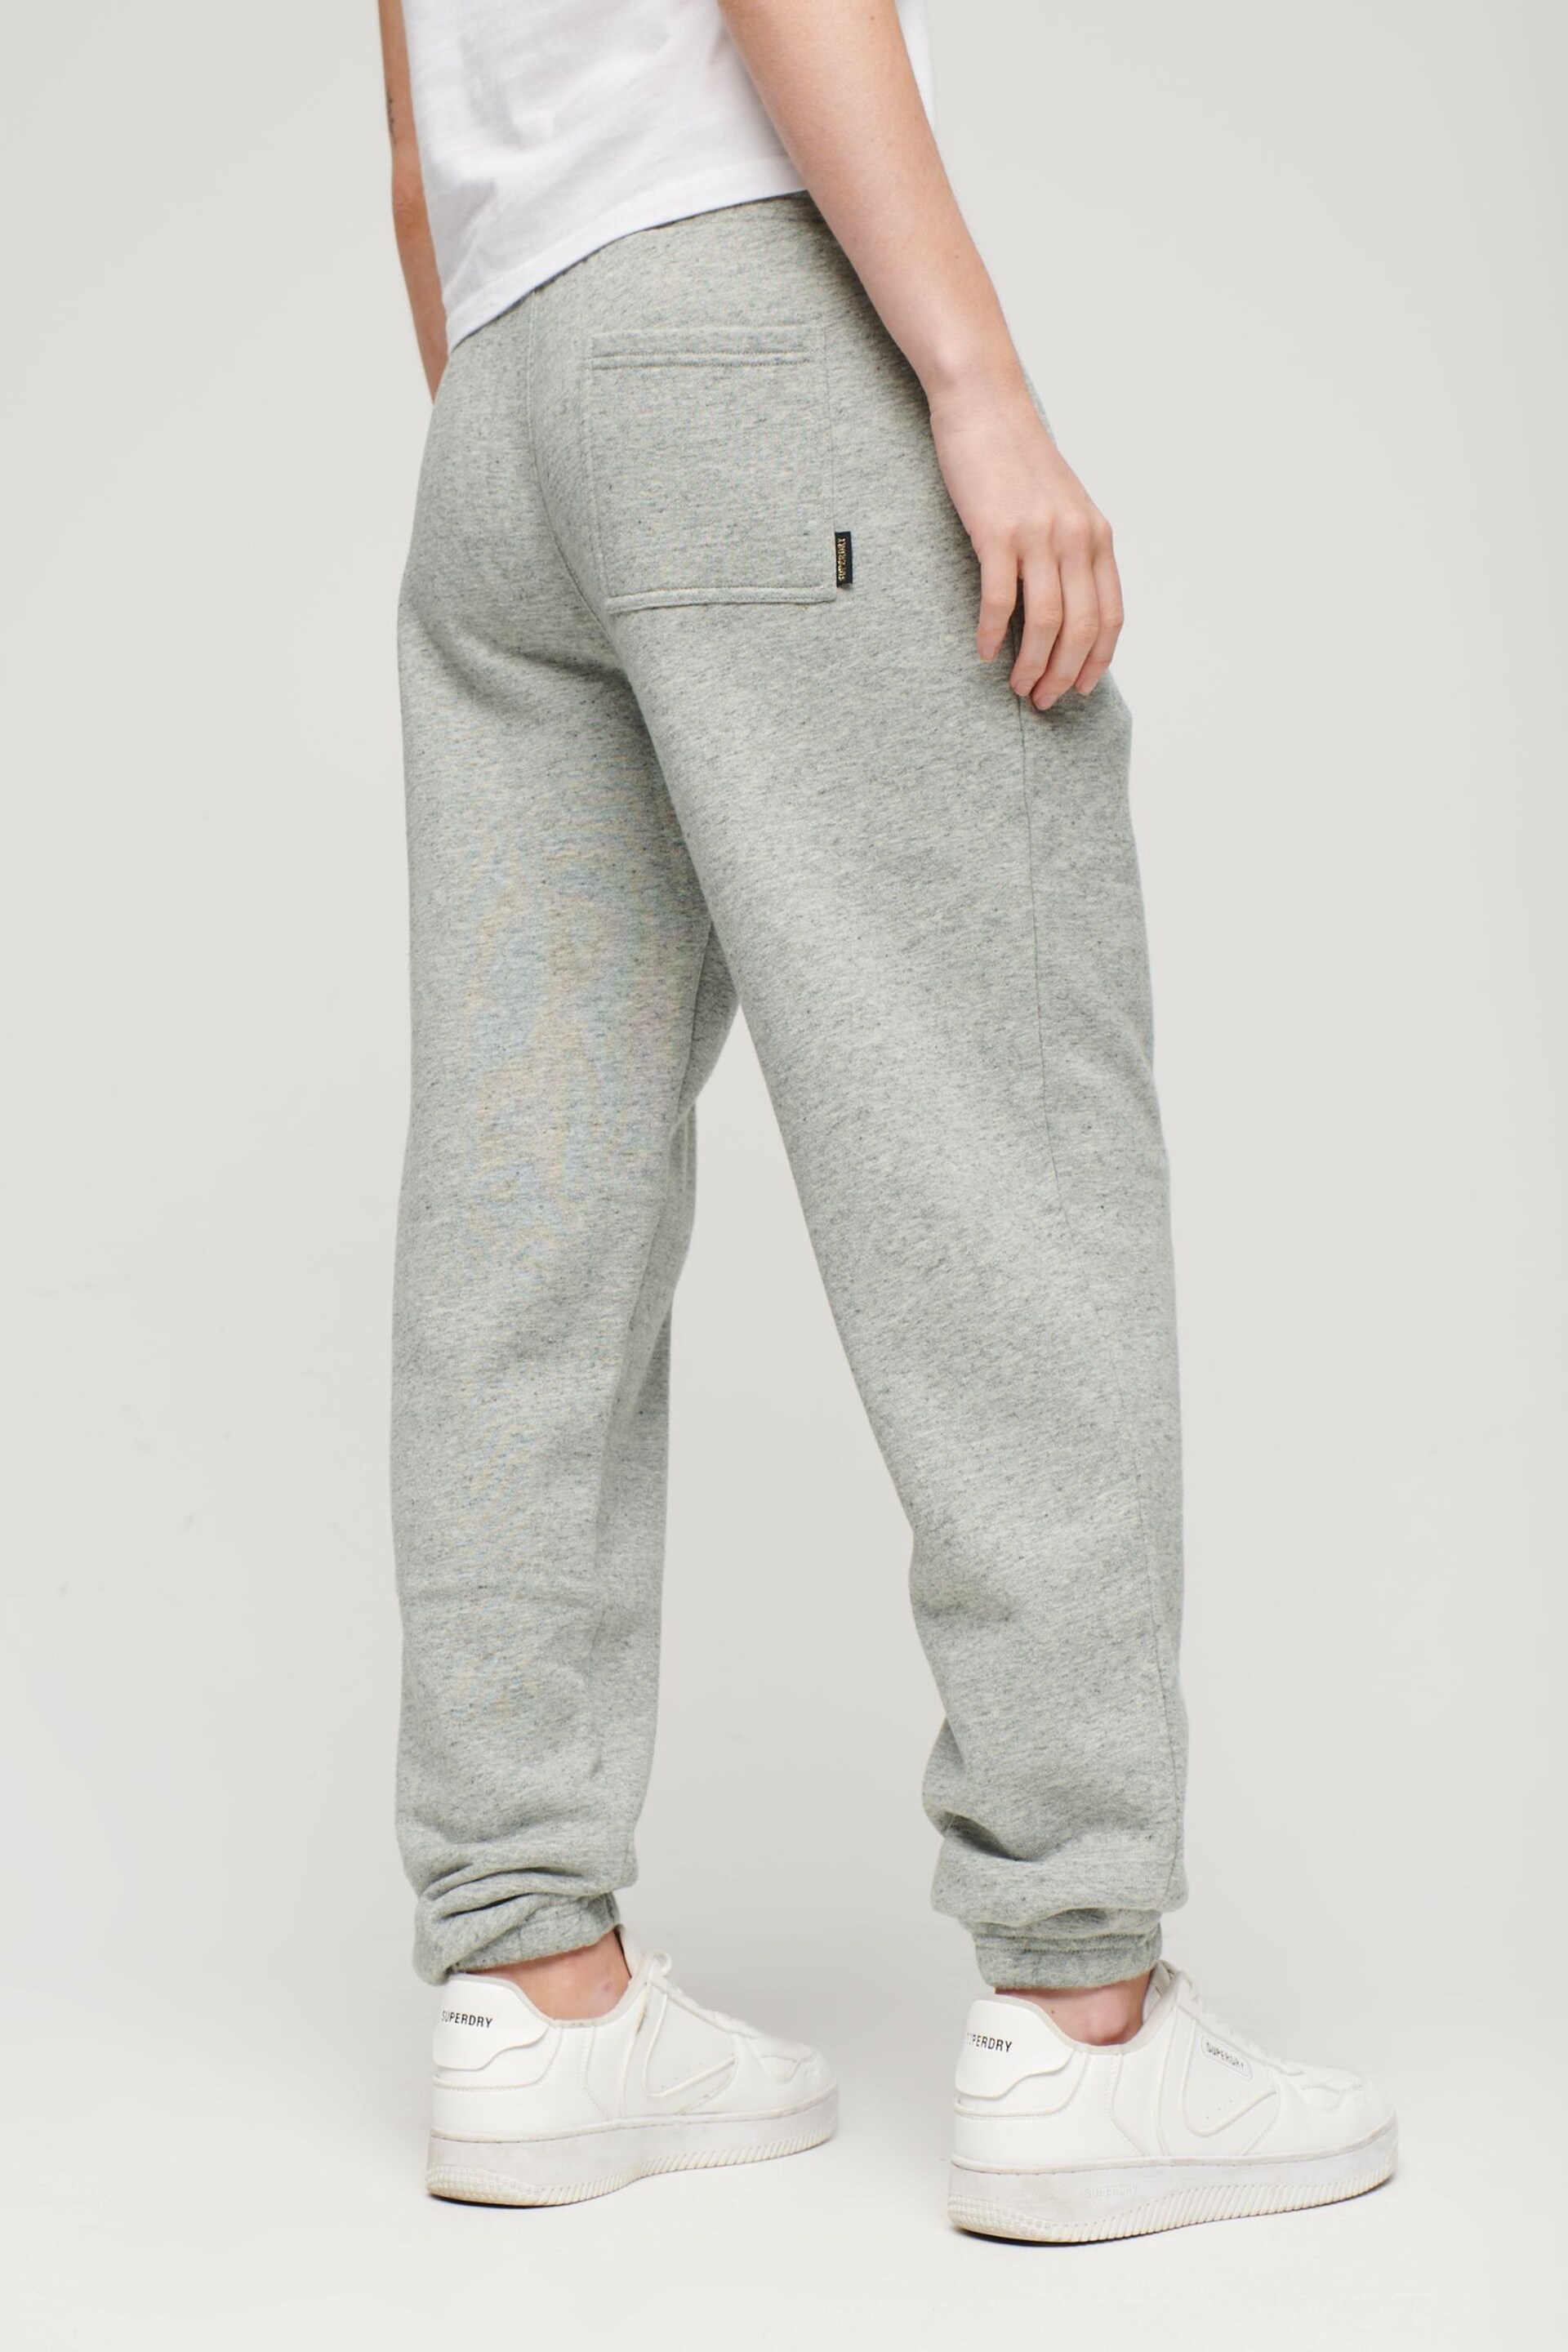 Superdry Grey/White Athletic College Logo Joggers - Image 4 of 4